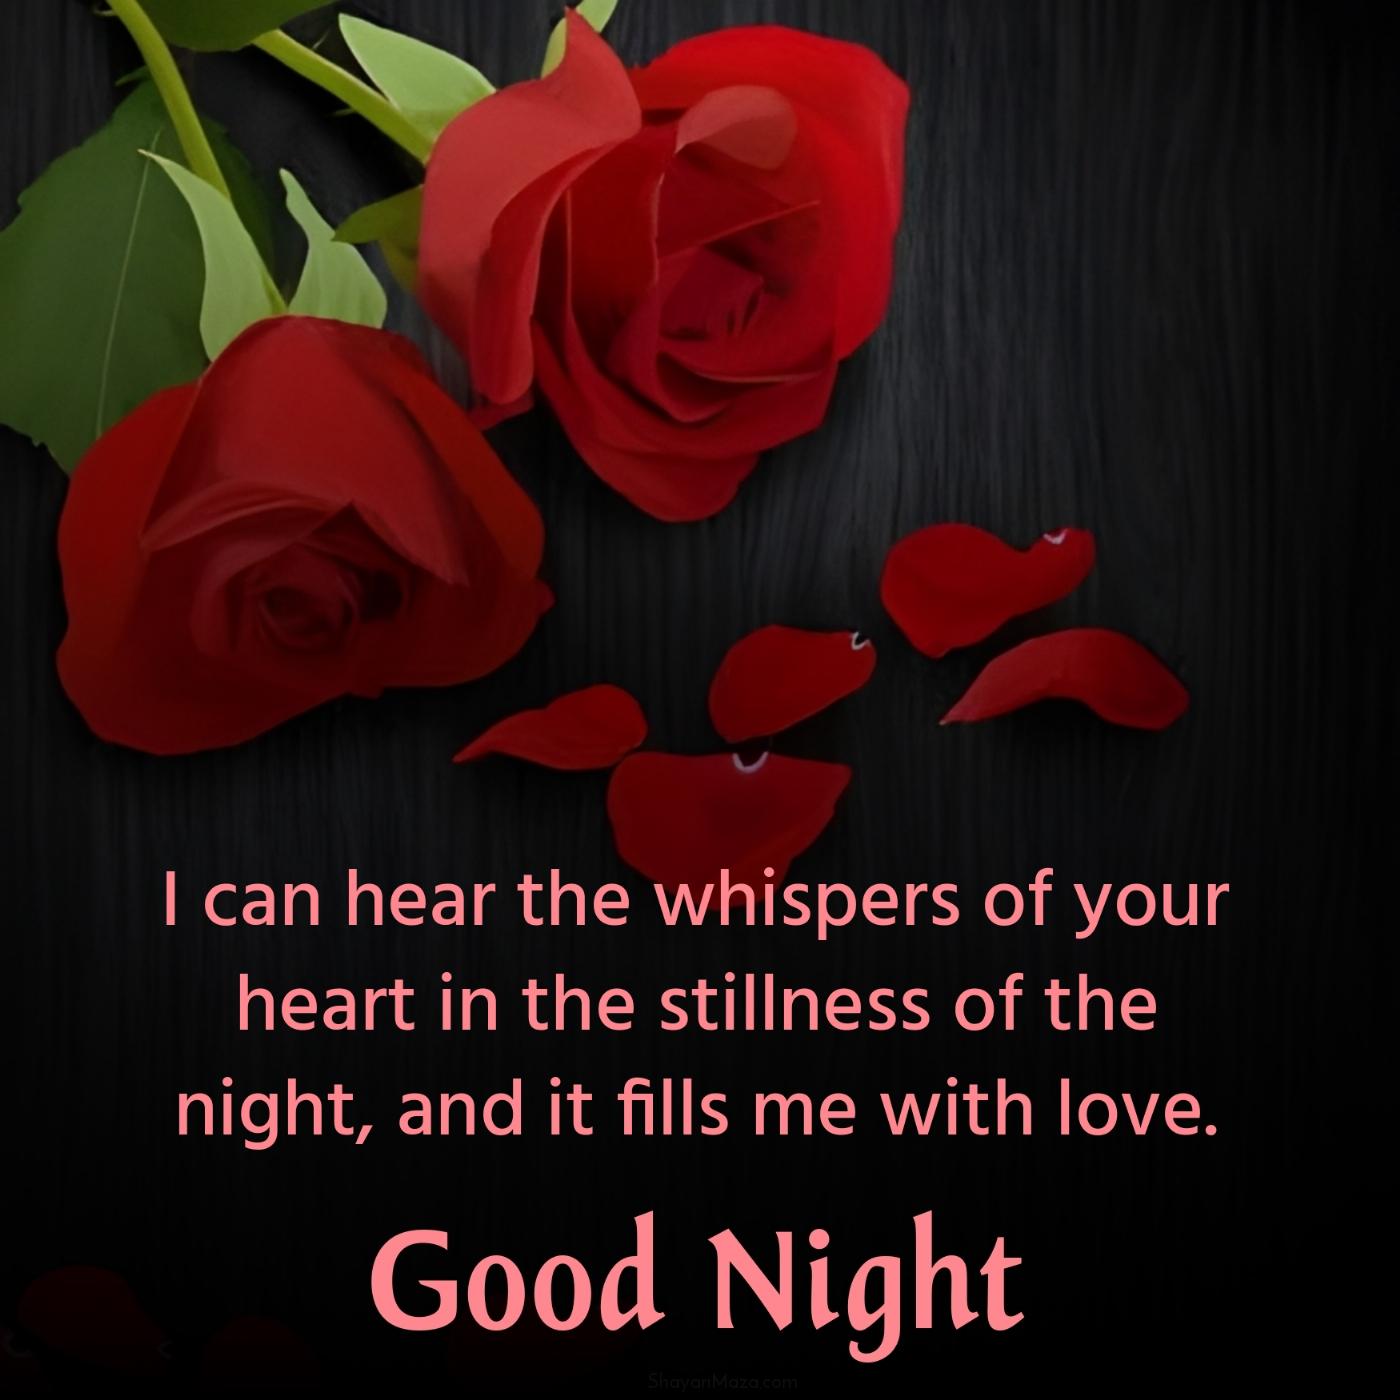 I can hear the whispers of your heart in the stillness of the night